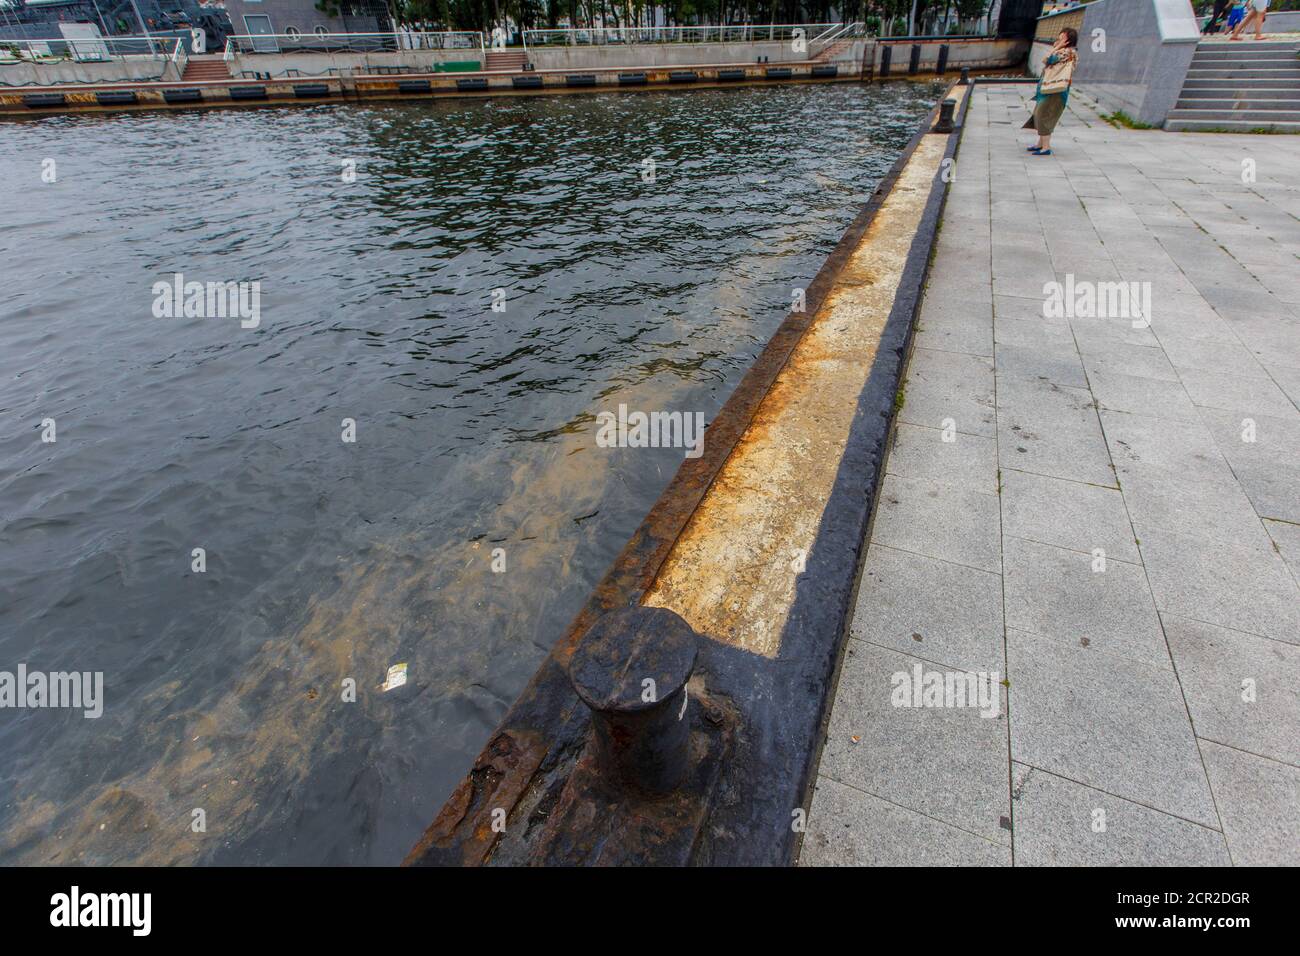 Ecological catastrophy. Spill of oil products into the sea. Stock Photo